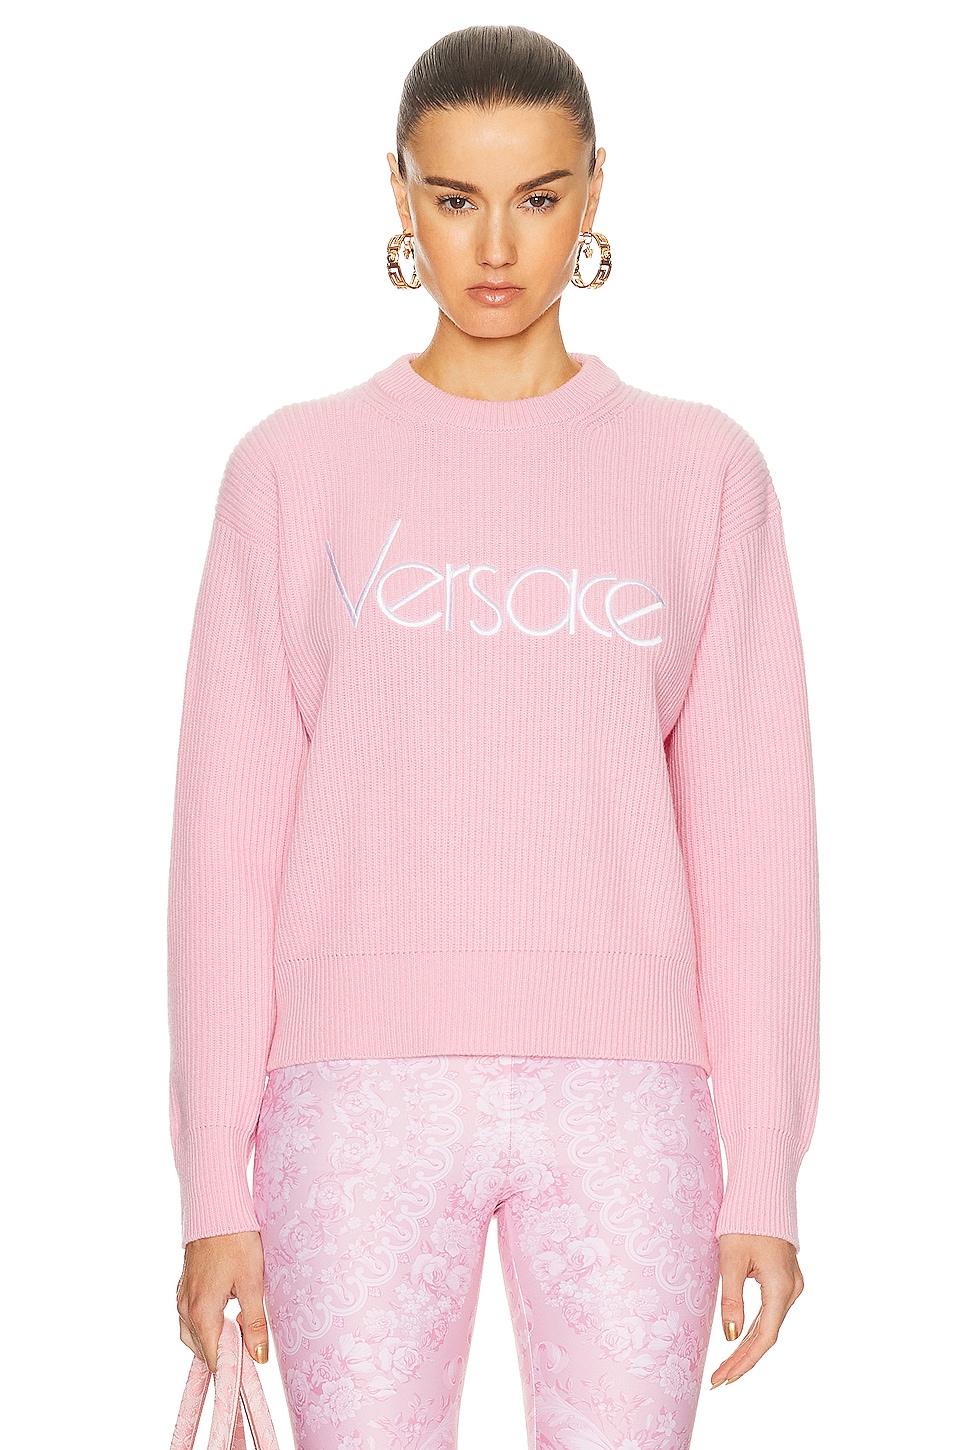 90's Embroidered Knit Sweater in Pink